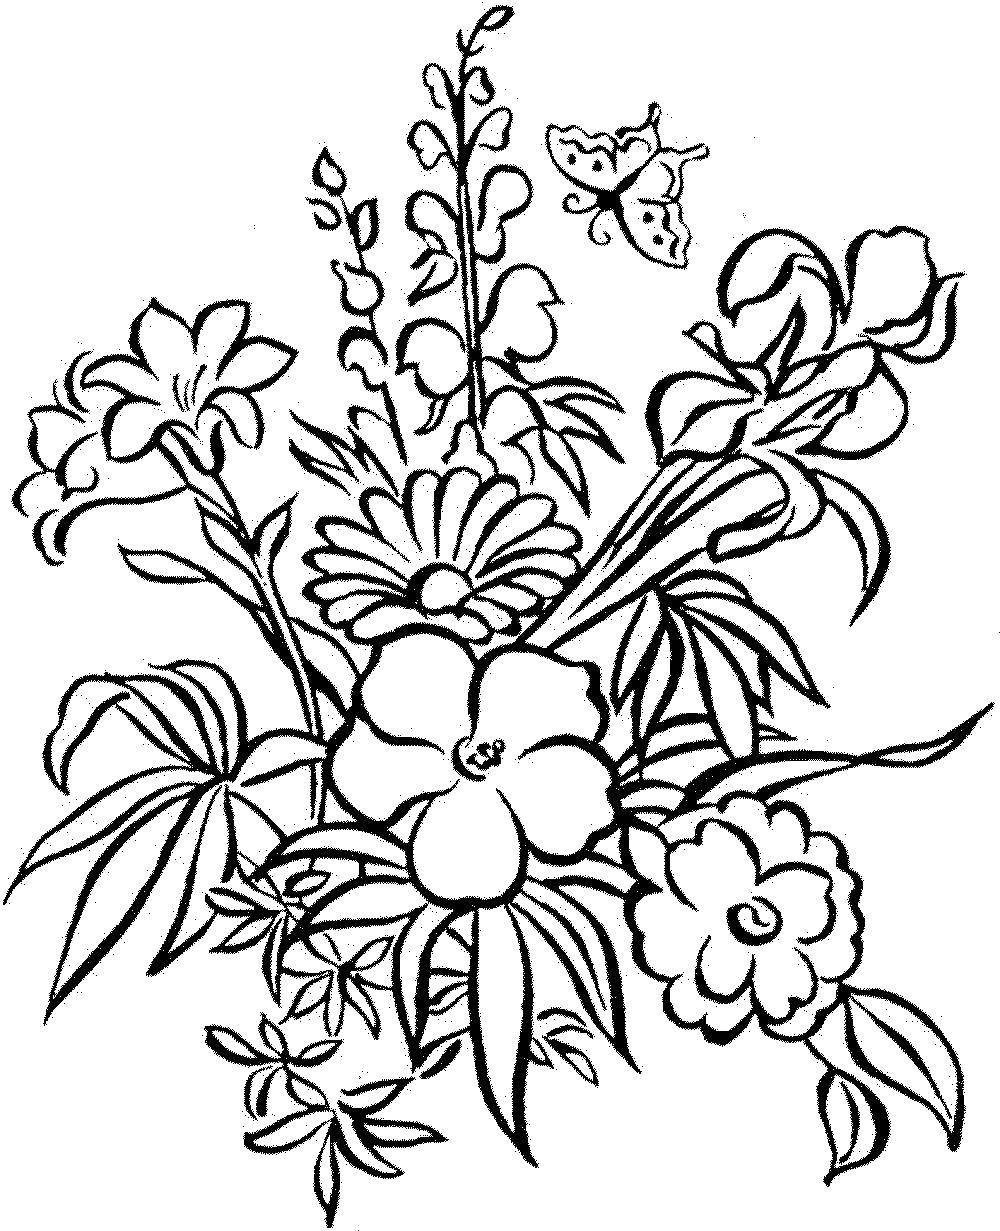 Coloring A beautiful bouquet. Category flowers. Tags:  Flowers, bouquet.